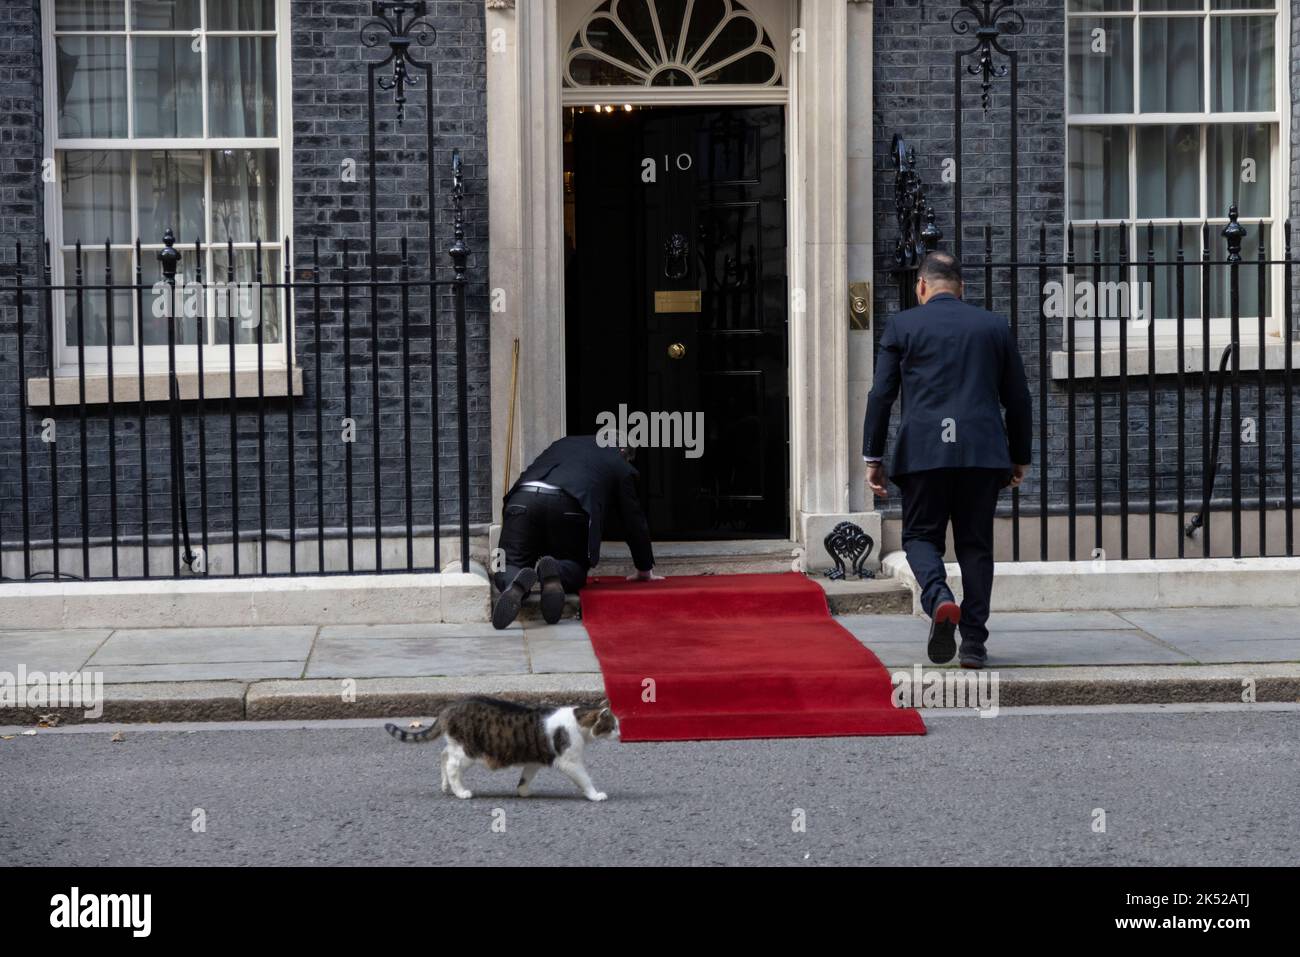 Red carpet is laid in front of the main No.10 Downing Street entrance doorway ahead of a State visit, Whitehall, London, England, UK Stock Photo